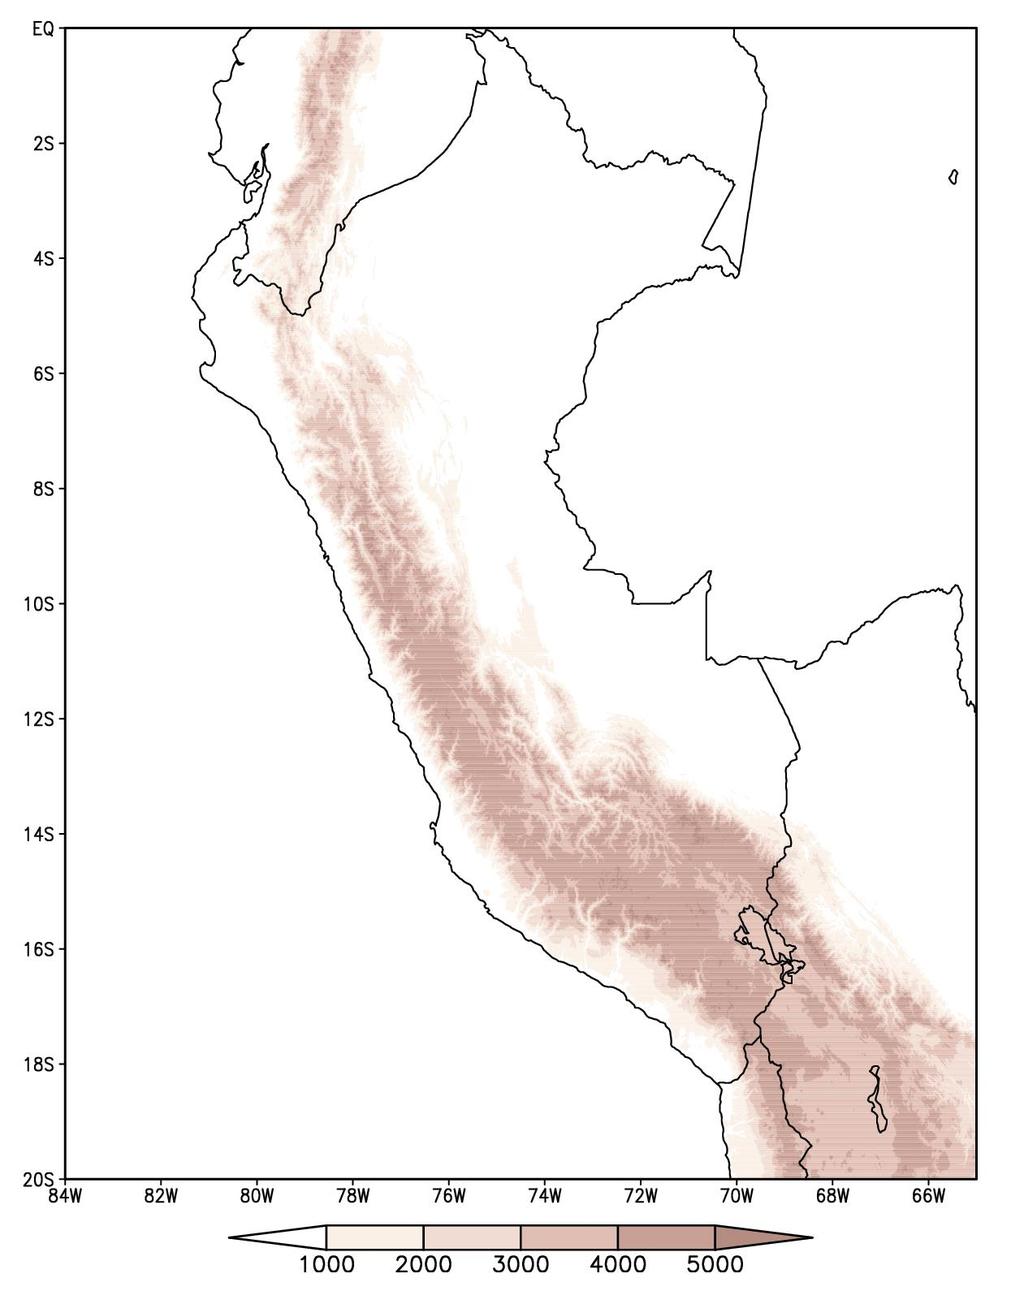 c. Study Area: Peru AMAZONIA Peru is located along the central western coast of South America (18.2 S-0 S, 81.7 W-68.6 W). The maximum (peak) height of the Peruvian territory exceeds 6000 m.